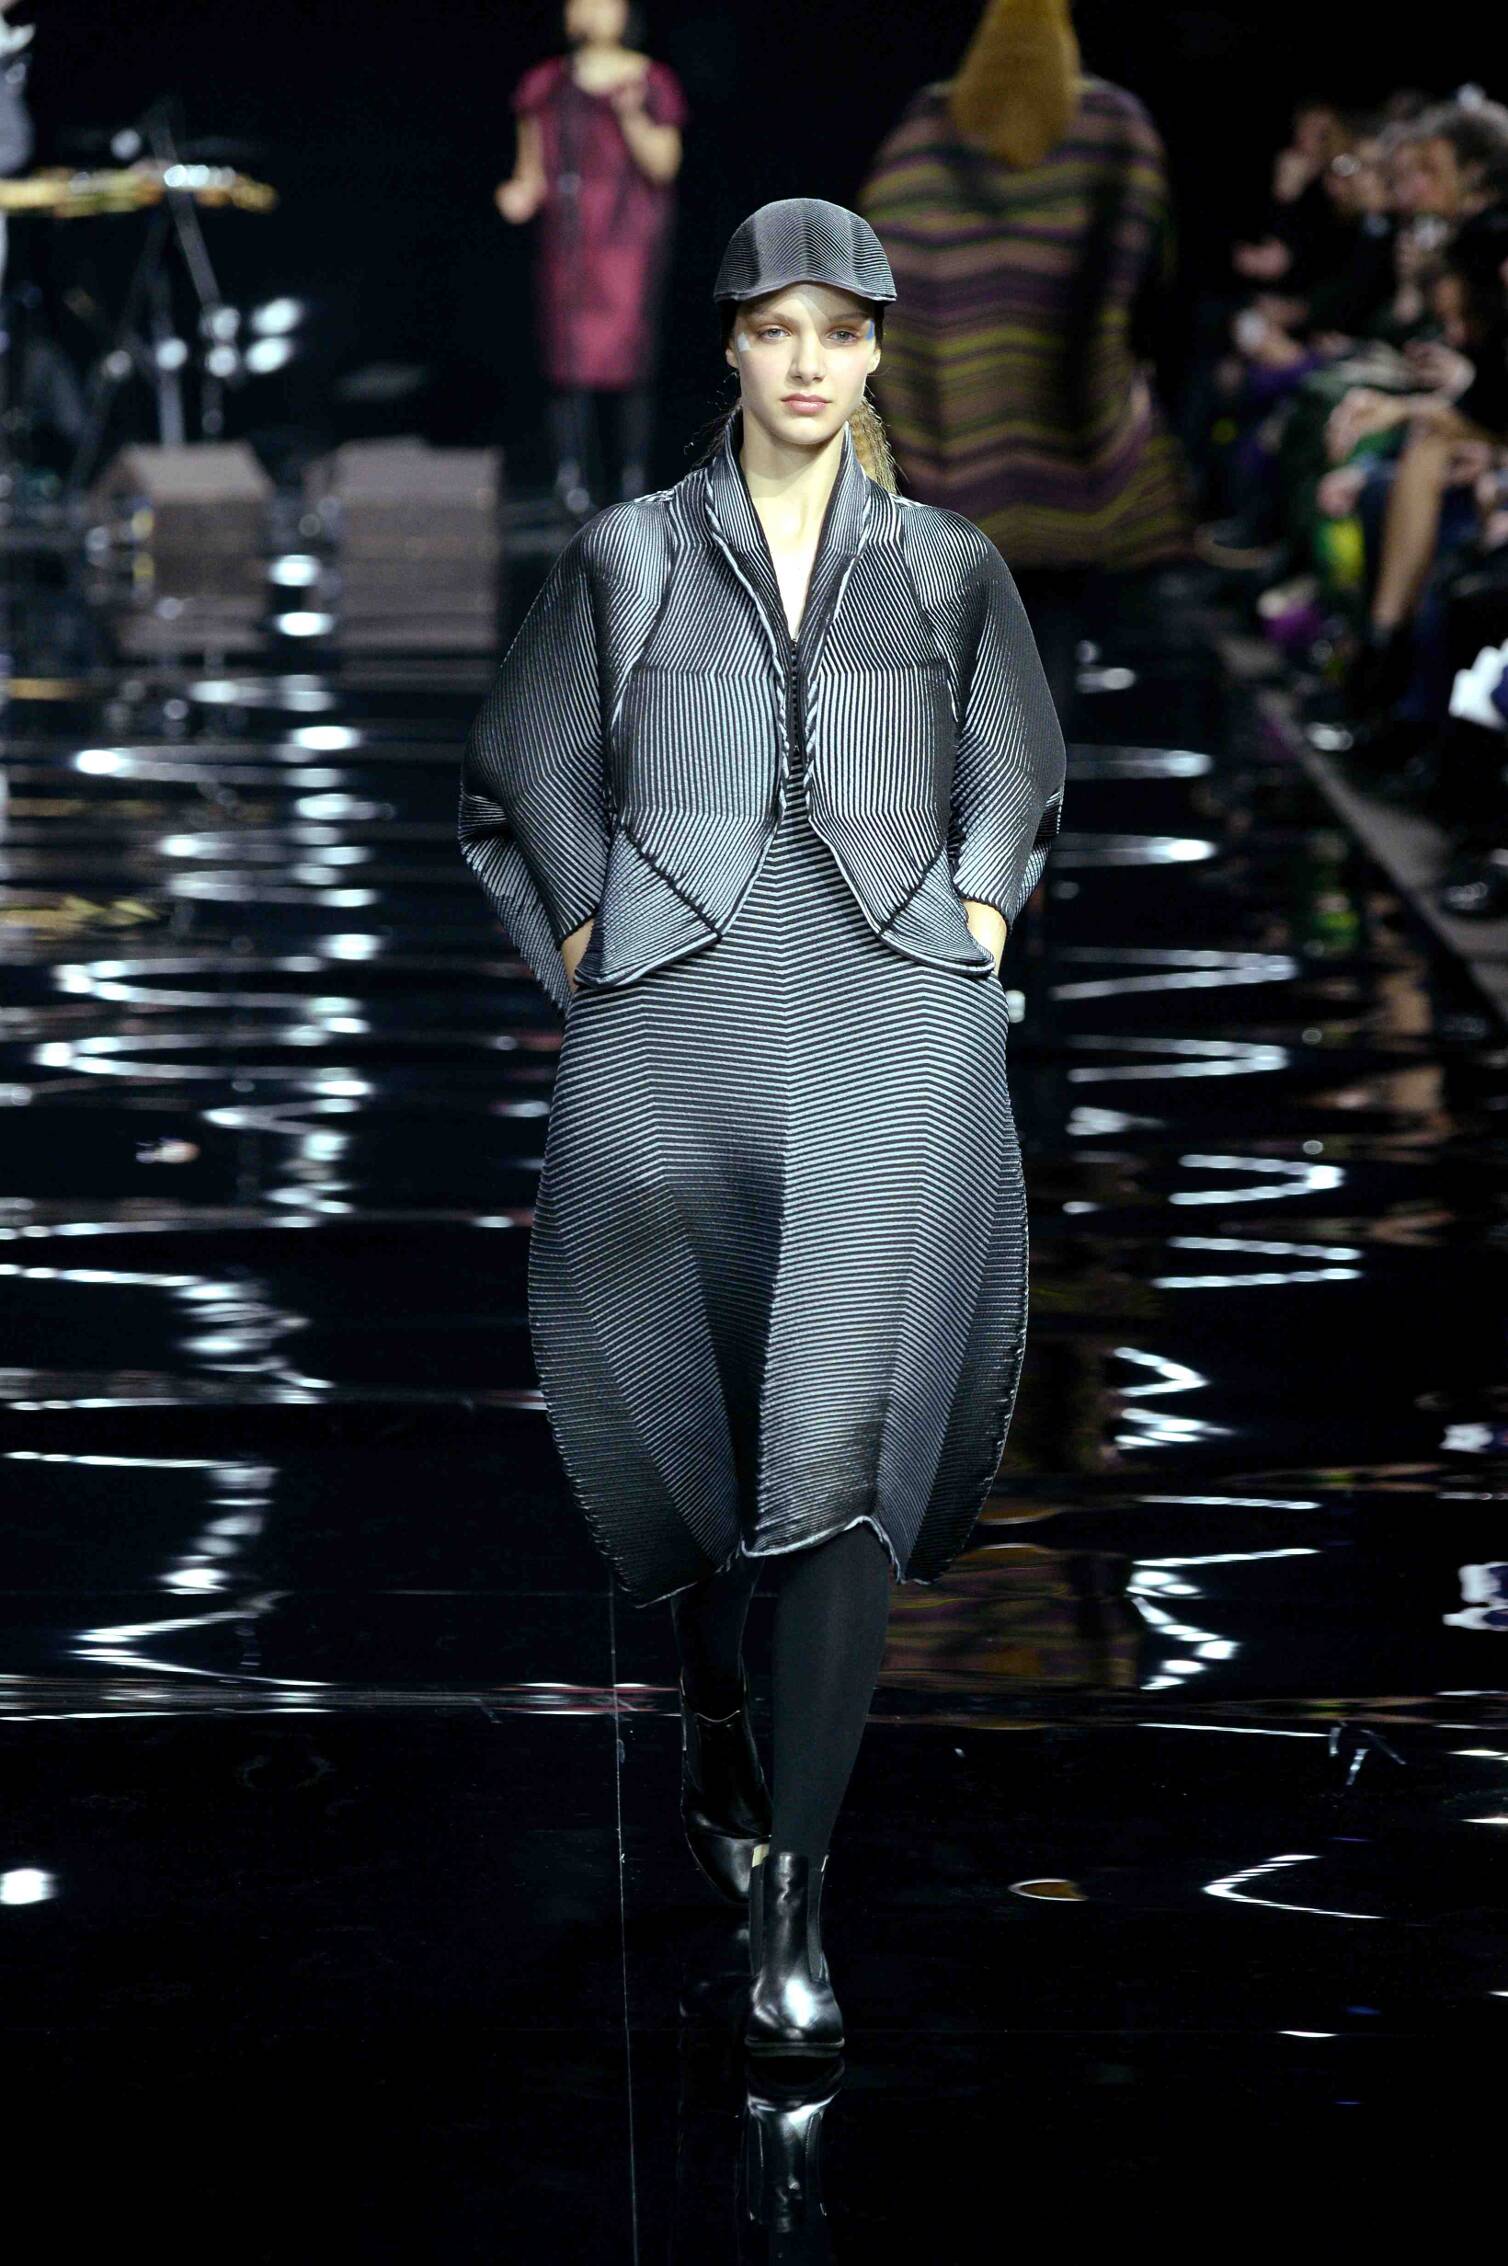 ISSEY MIYAKE FALL WINTER 2015-16 WOMEN’S COLLECTION | The Skinny Beep